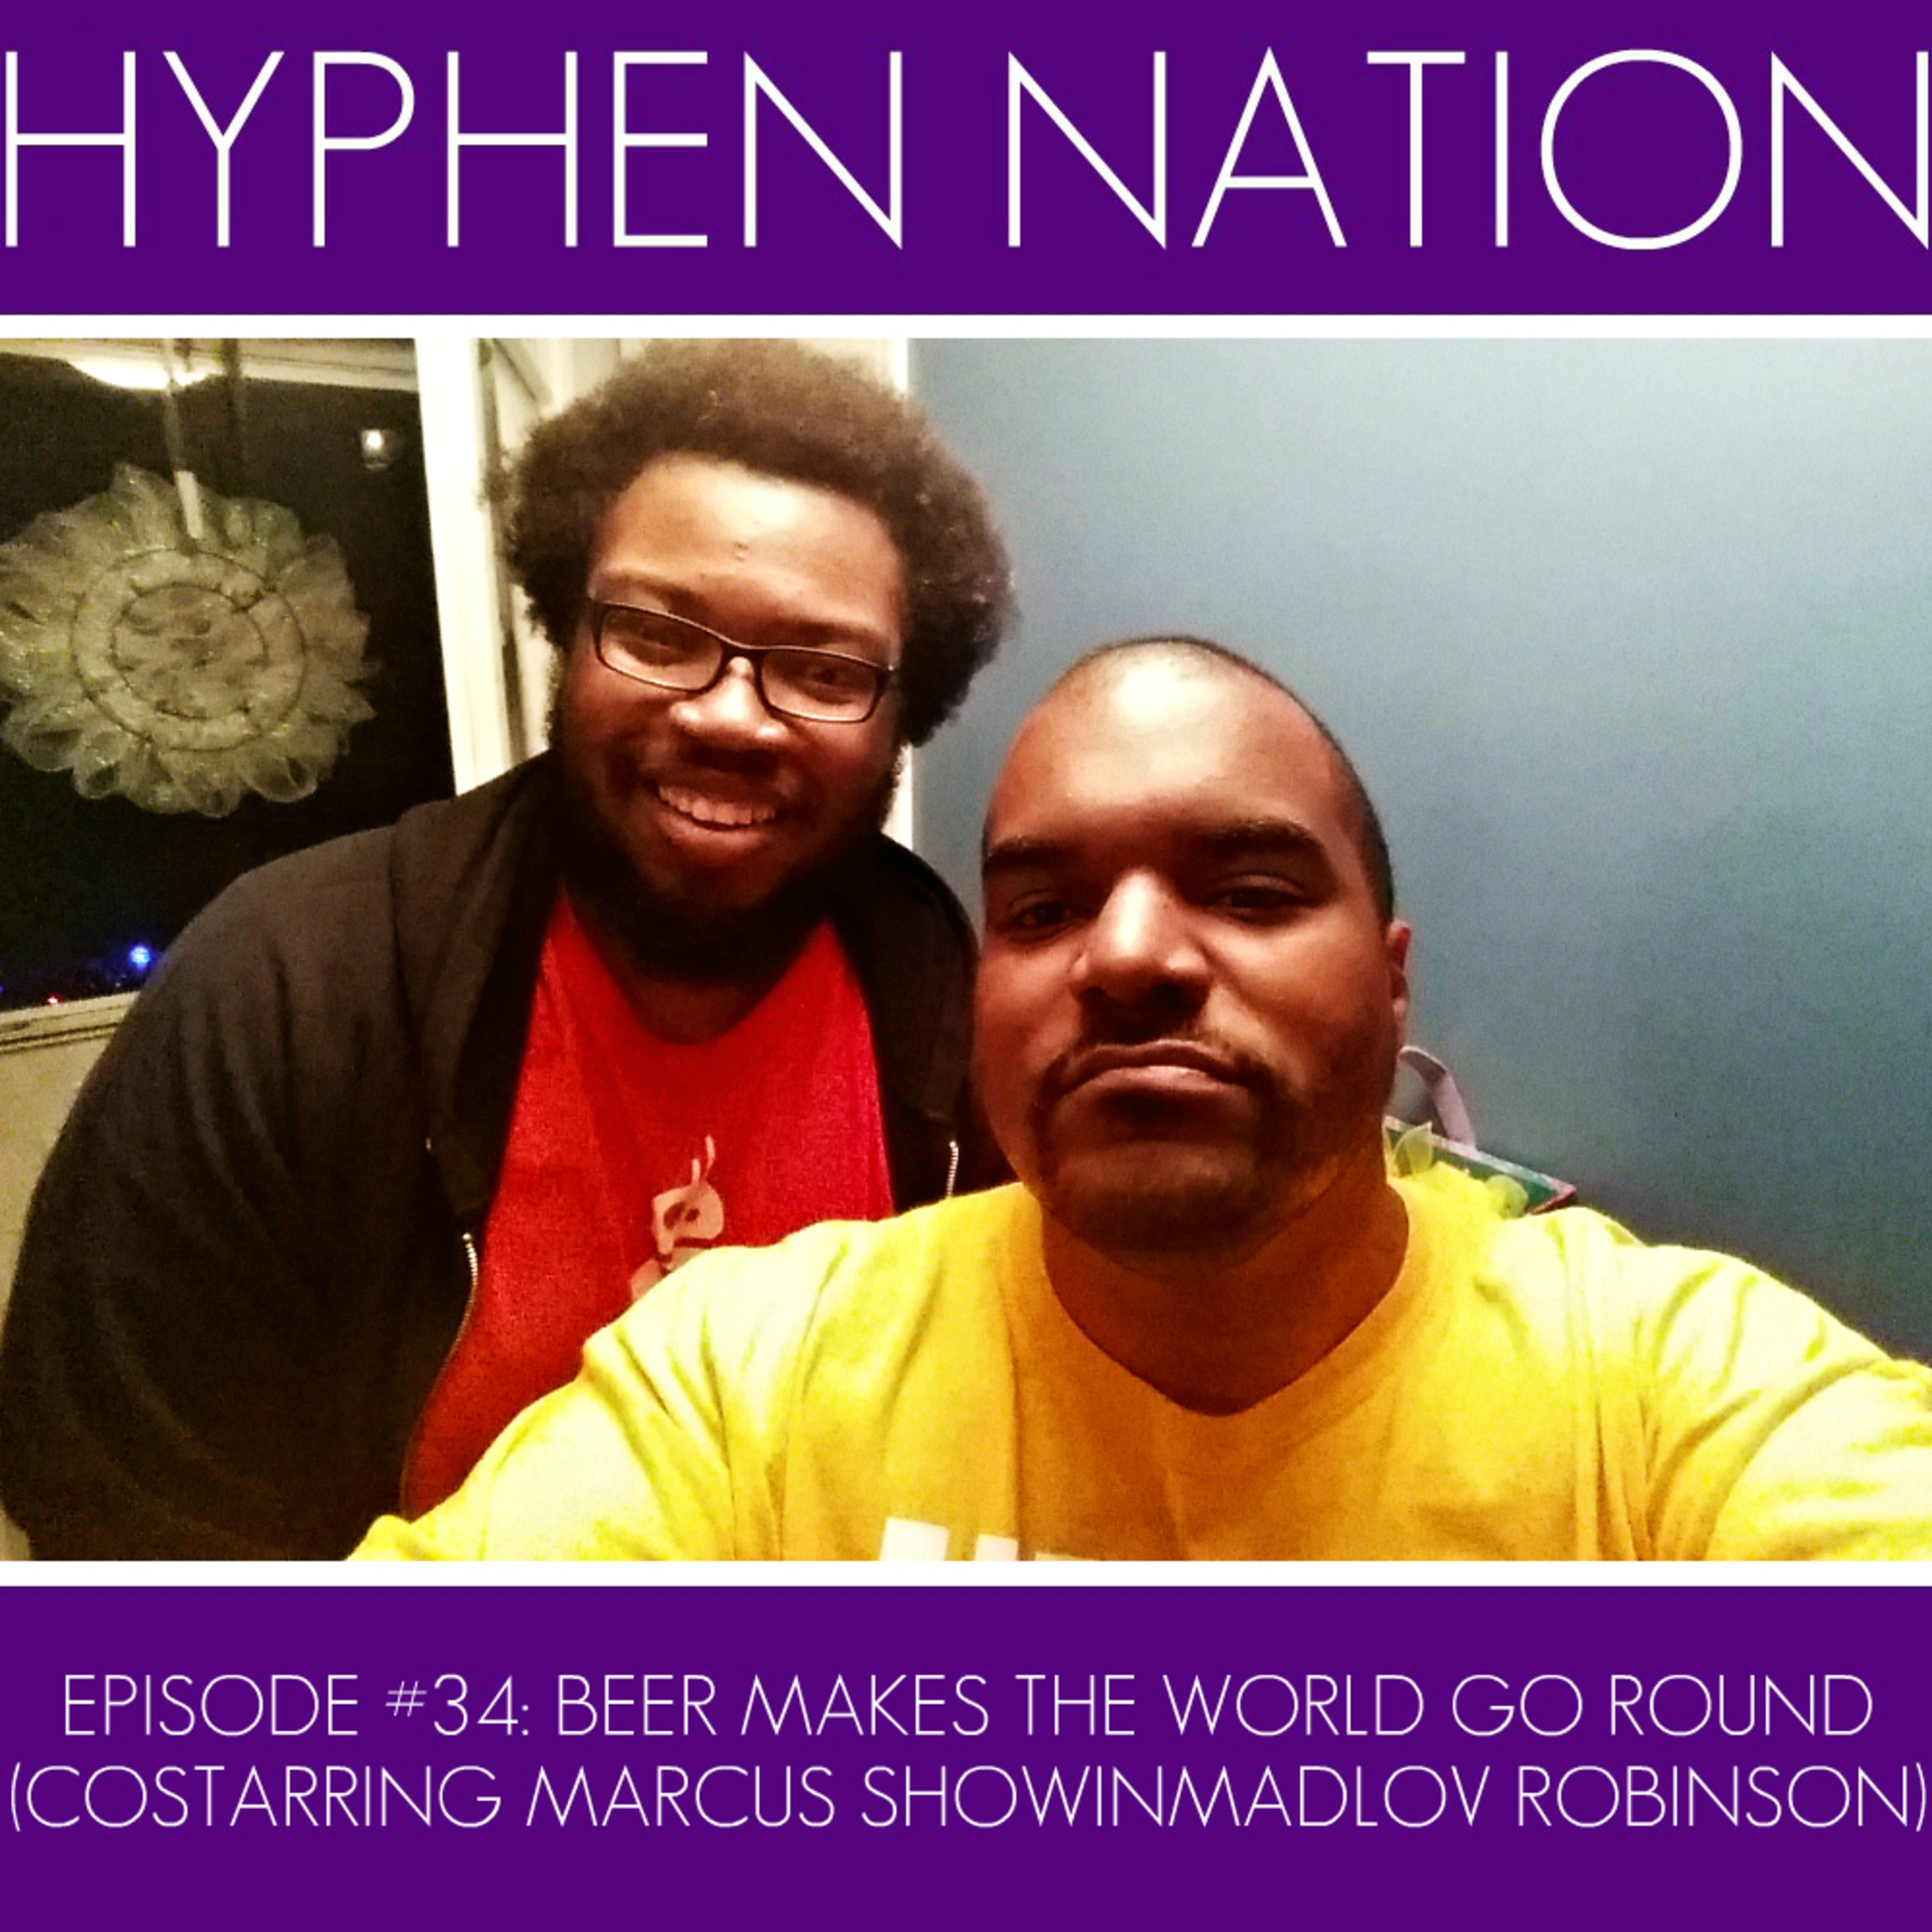 Episode #34: Beer Makes The World Go Round (Costarring Marcus ShowinmadLov Robinson)